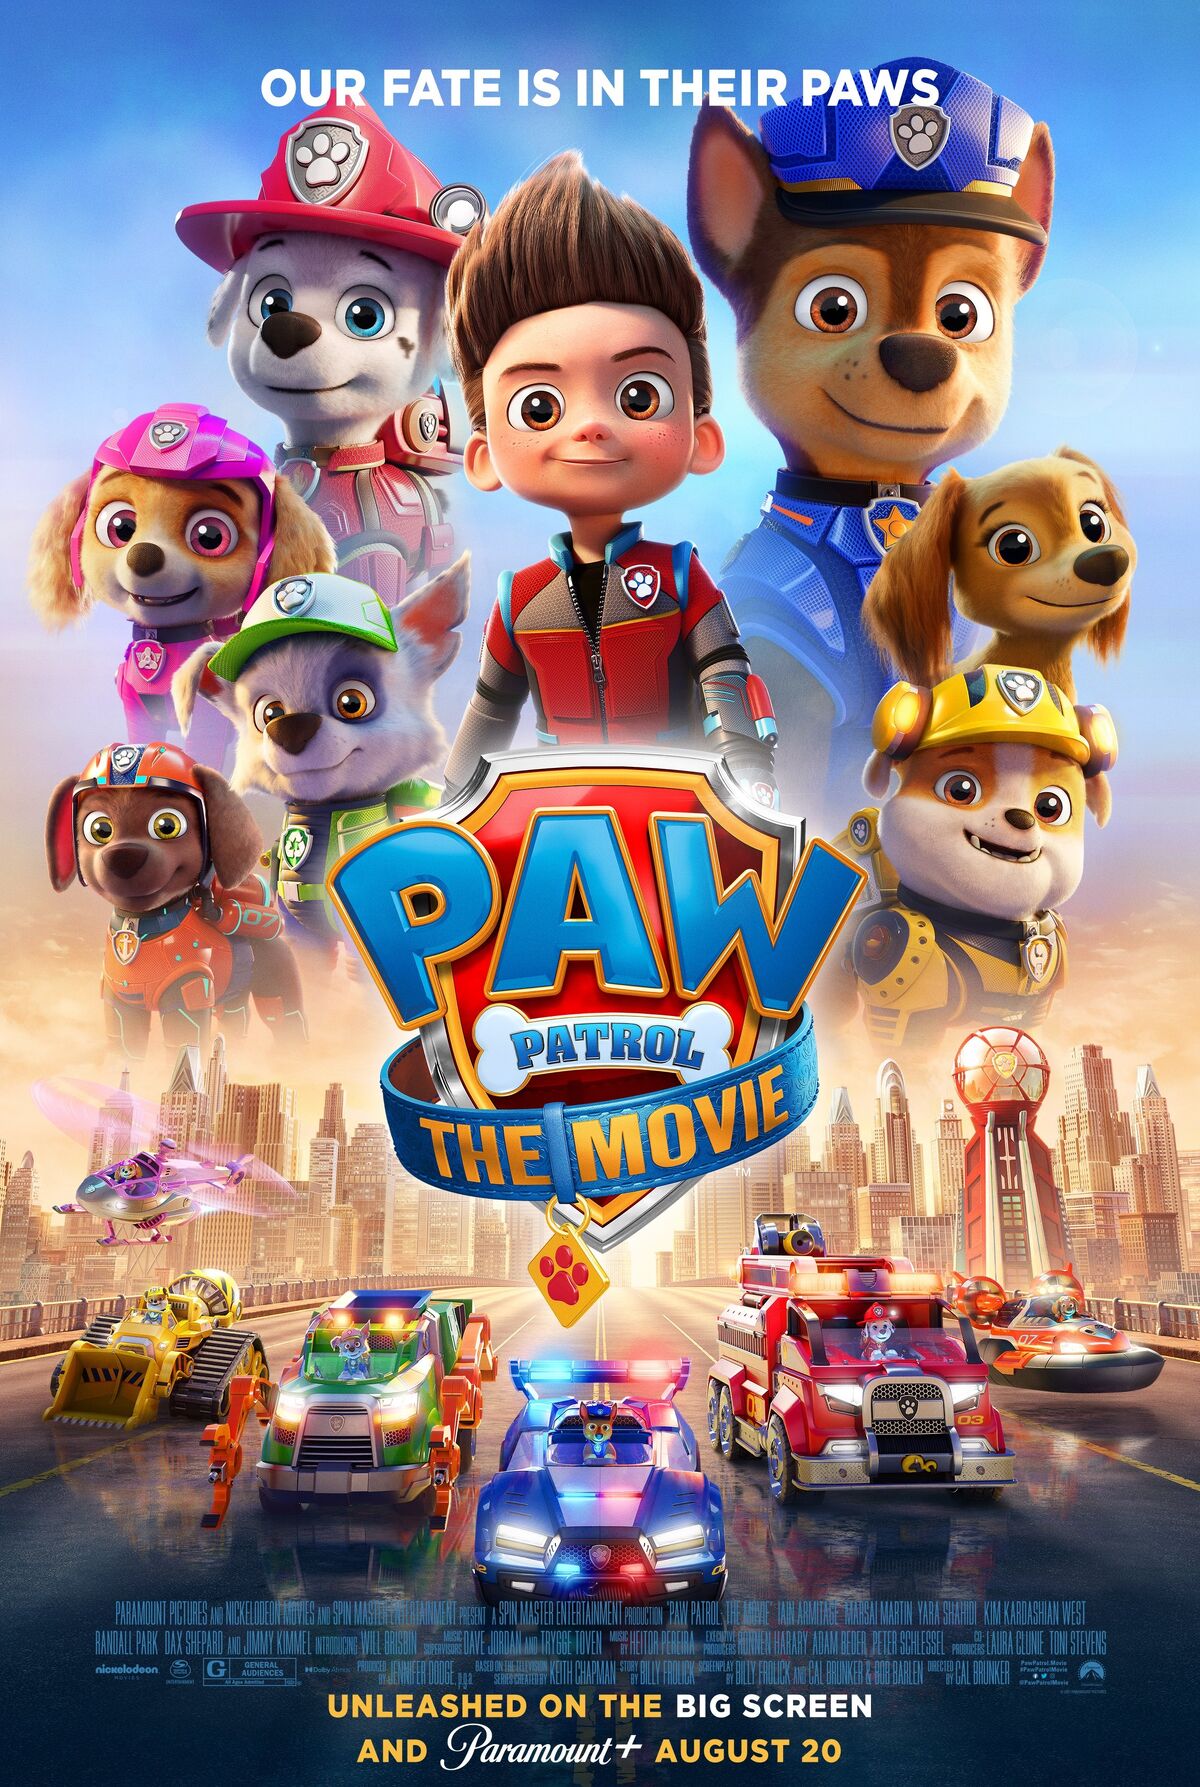 https://static.wikia.nocookie.net/jhmoviecollection/images/8/83/PAW_Patrol_The_Movie_poster.jpg/revision/latest/scale-to-width-down/1200?cb=20210603135305